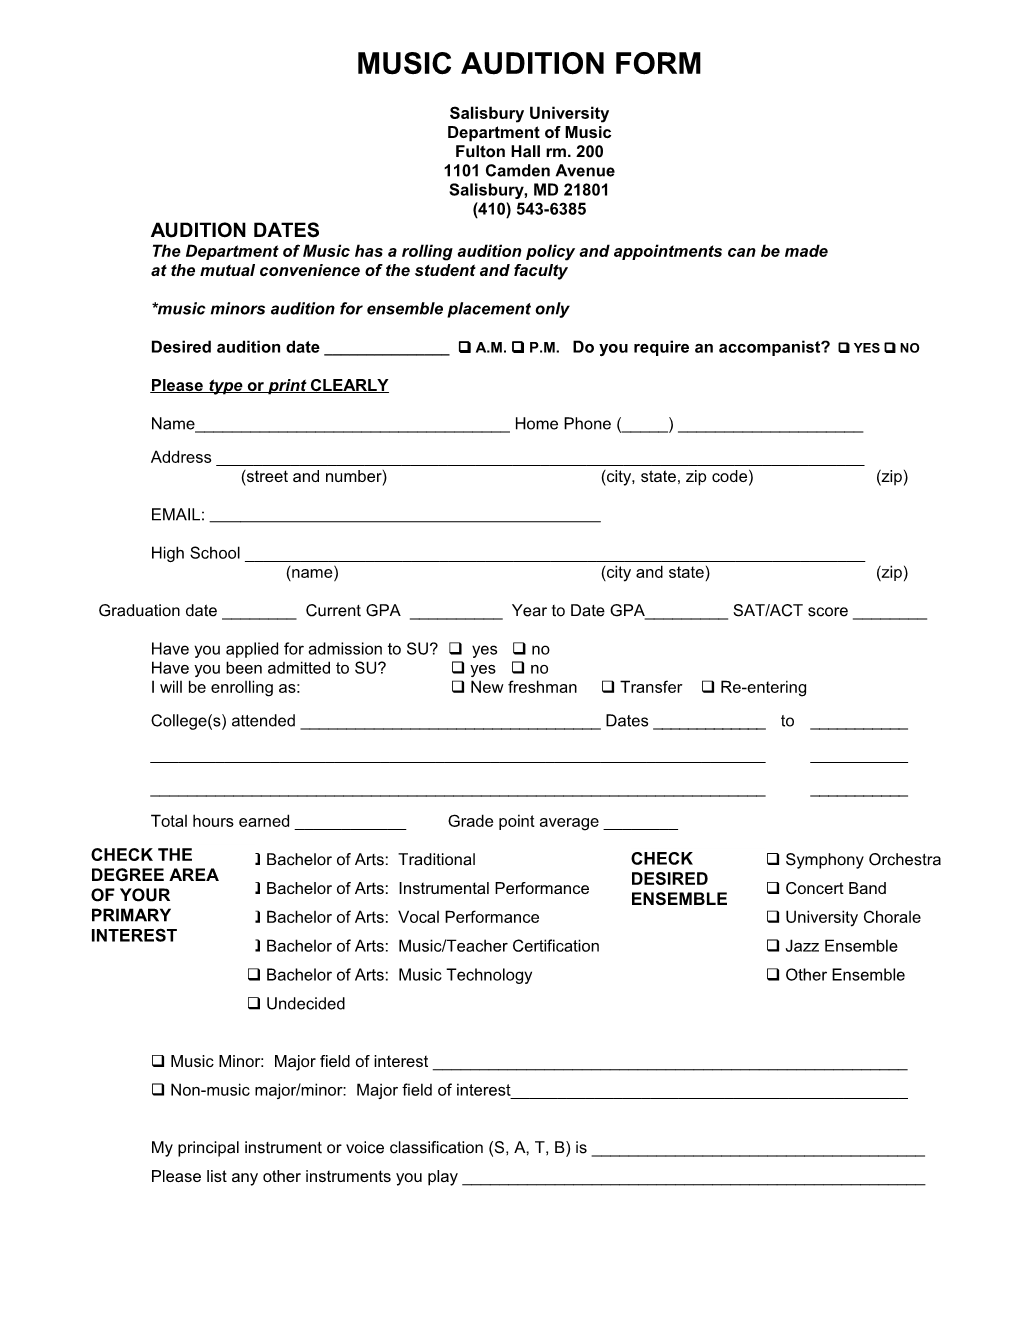 Music Audition Form